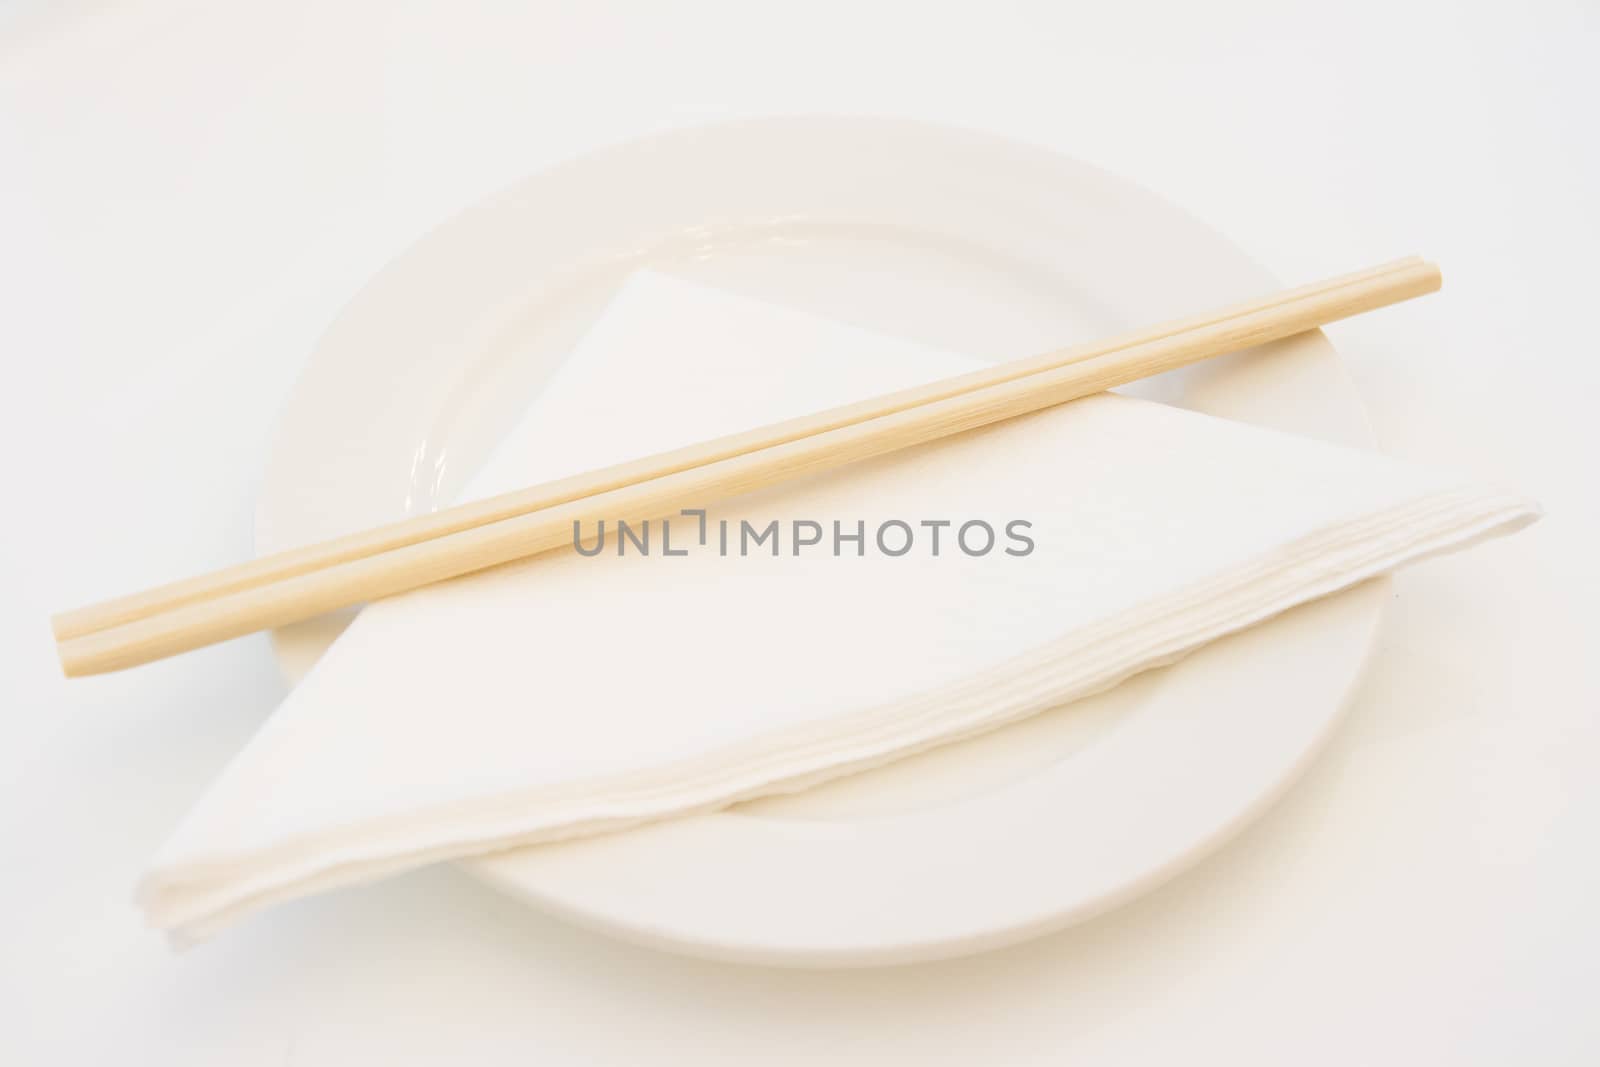 White plate with wooden chopsticks and paper napkin on, shallow depth of field